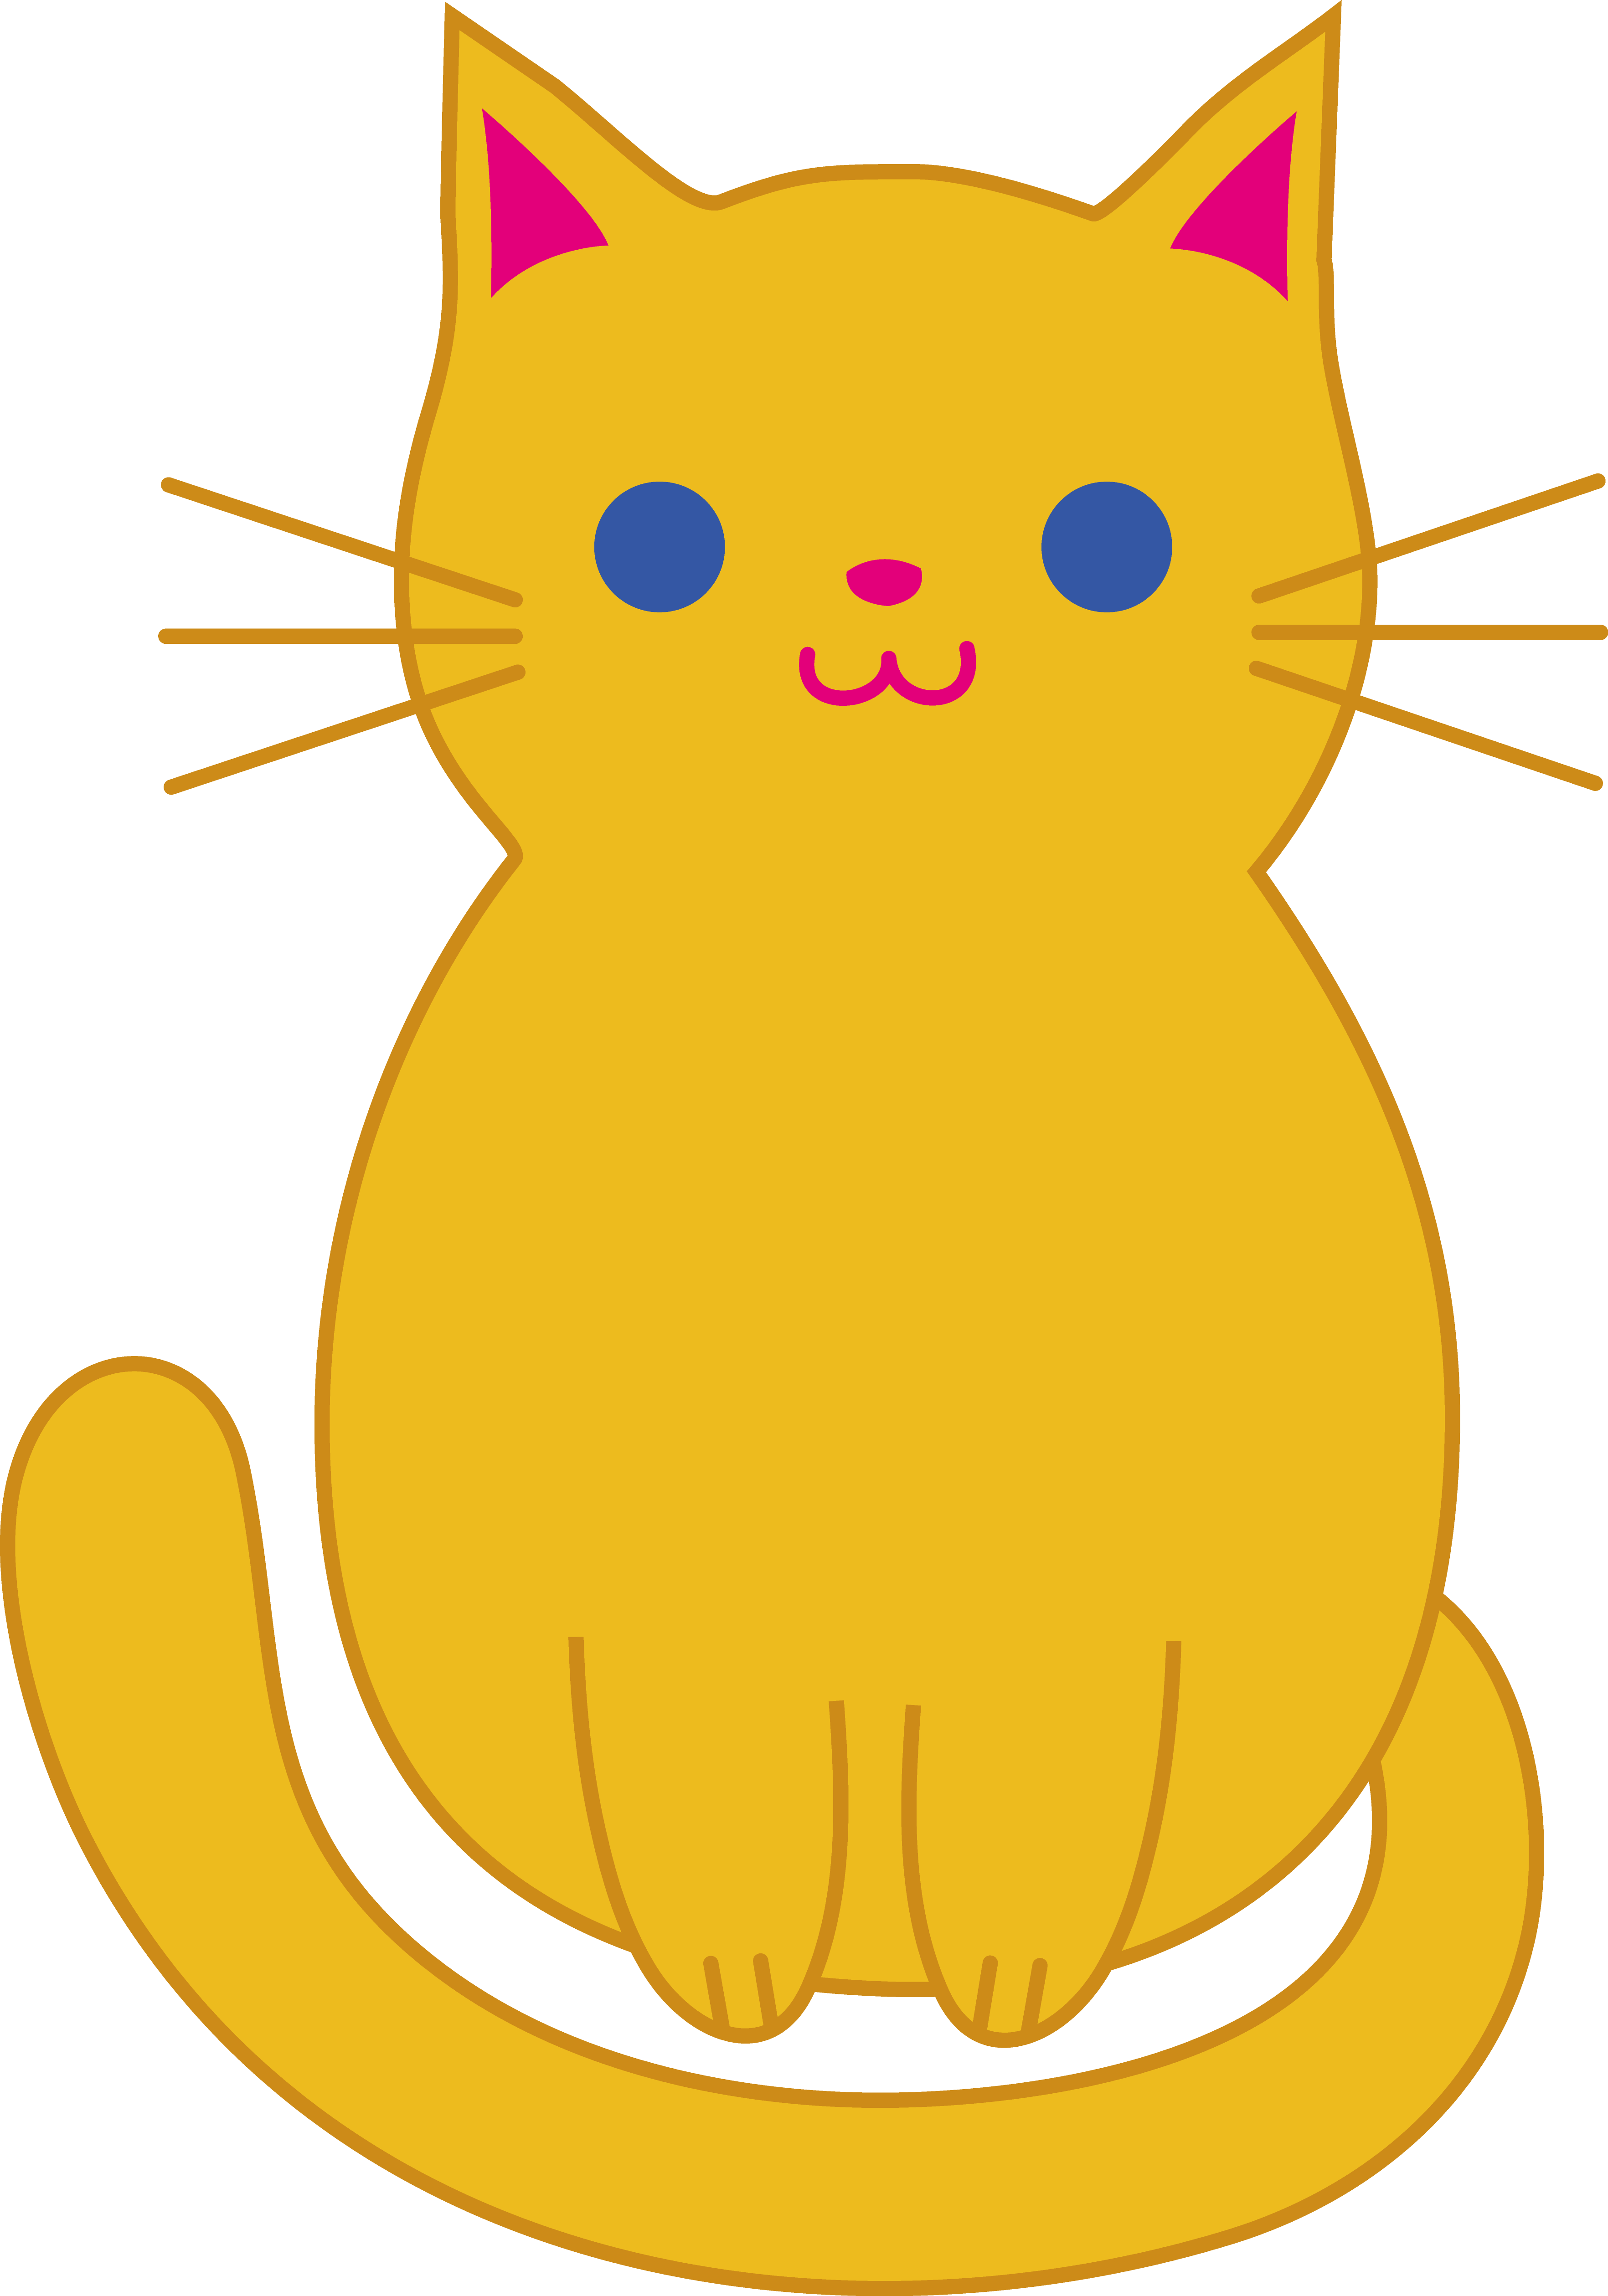 A Yellow Cat With Blue Eyes